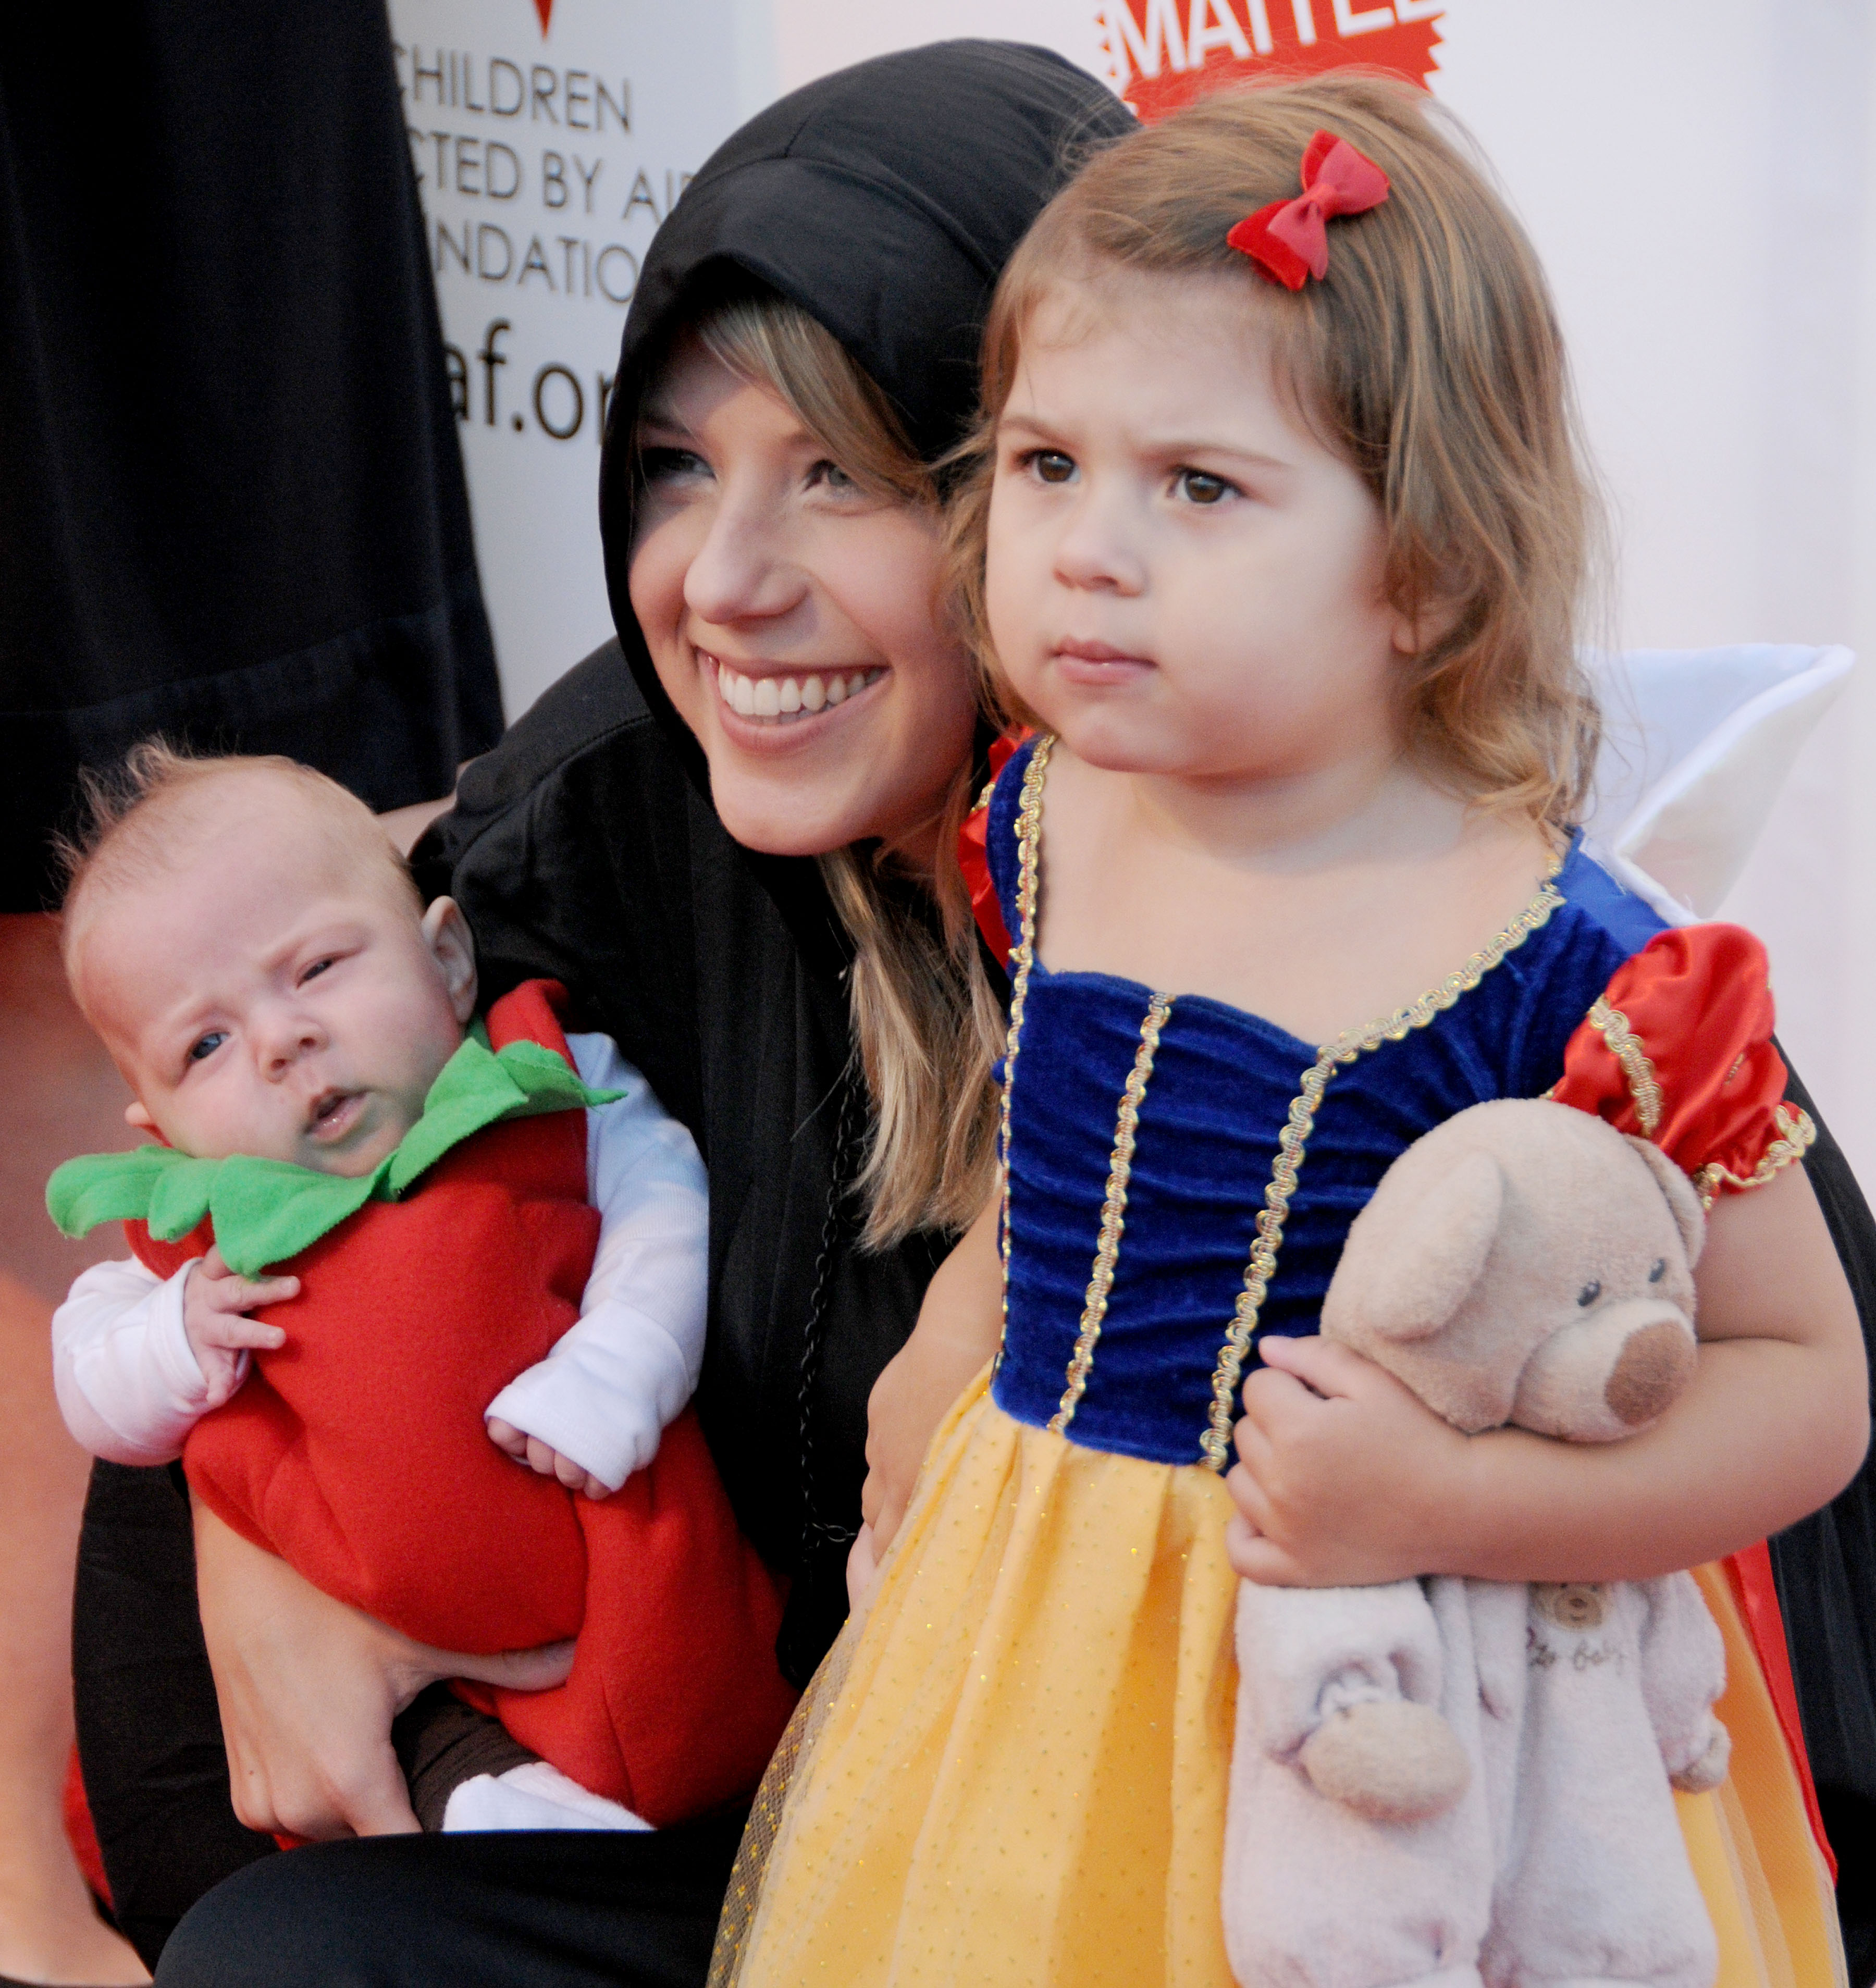 Jodie Sweetin, daughters Beatrix Carlin Sweetin Coyle and Zoie Laurelmae Herpin arrive at the 17th Annual Dream Halloween event at Barker Hangar on October 30, 2010, in Santa Monica, California. | Source: Getty Images